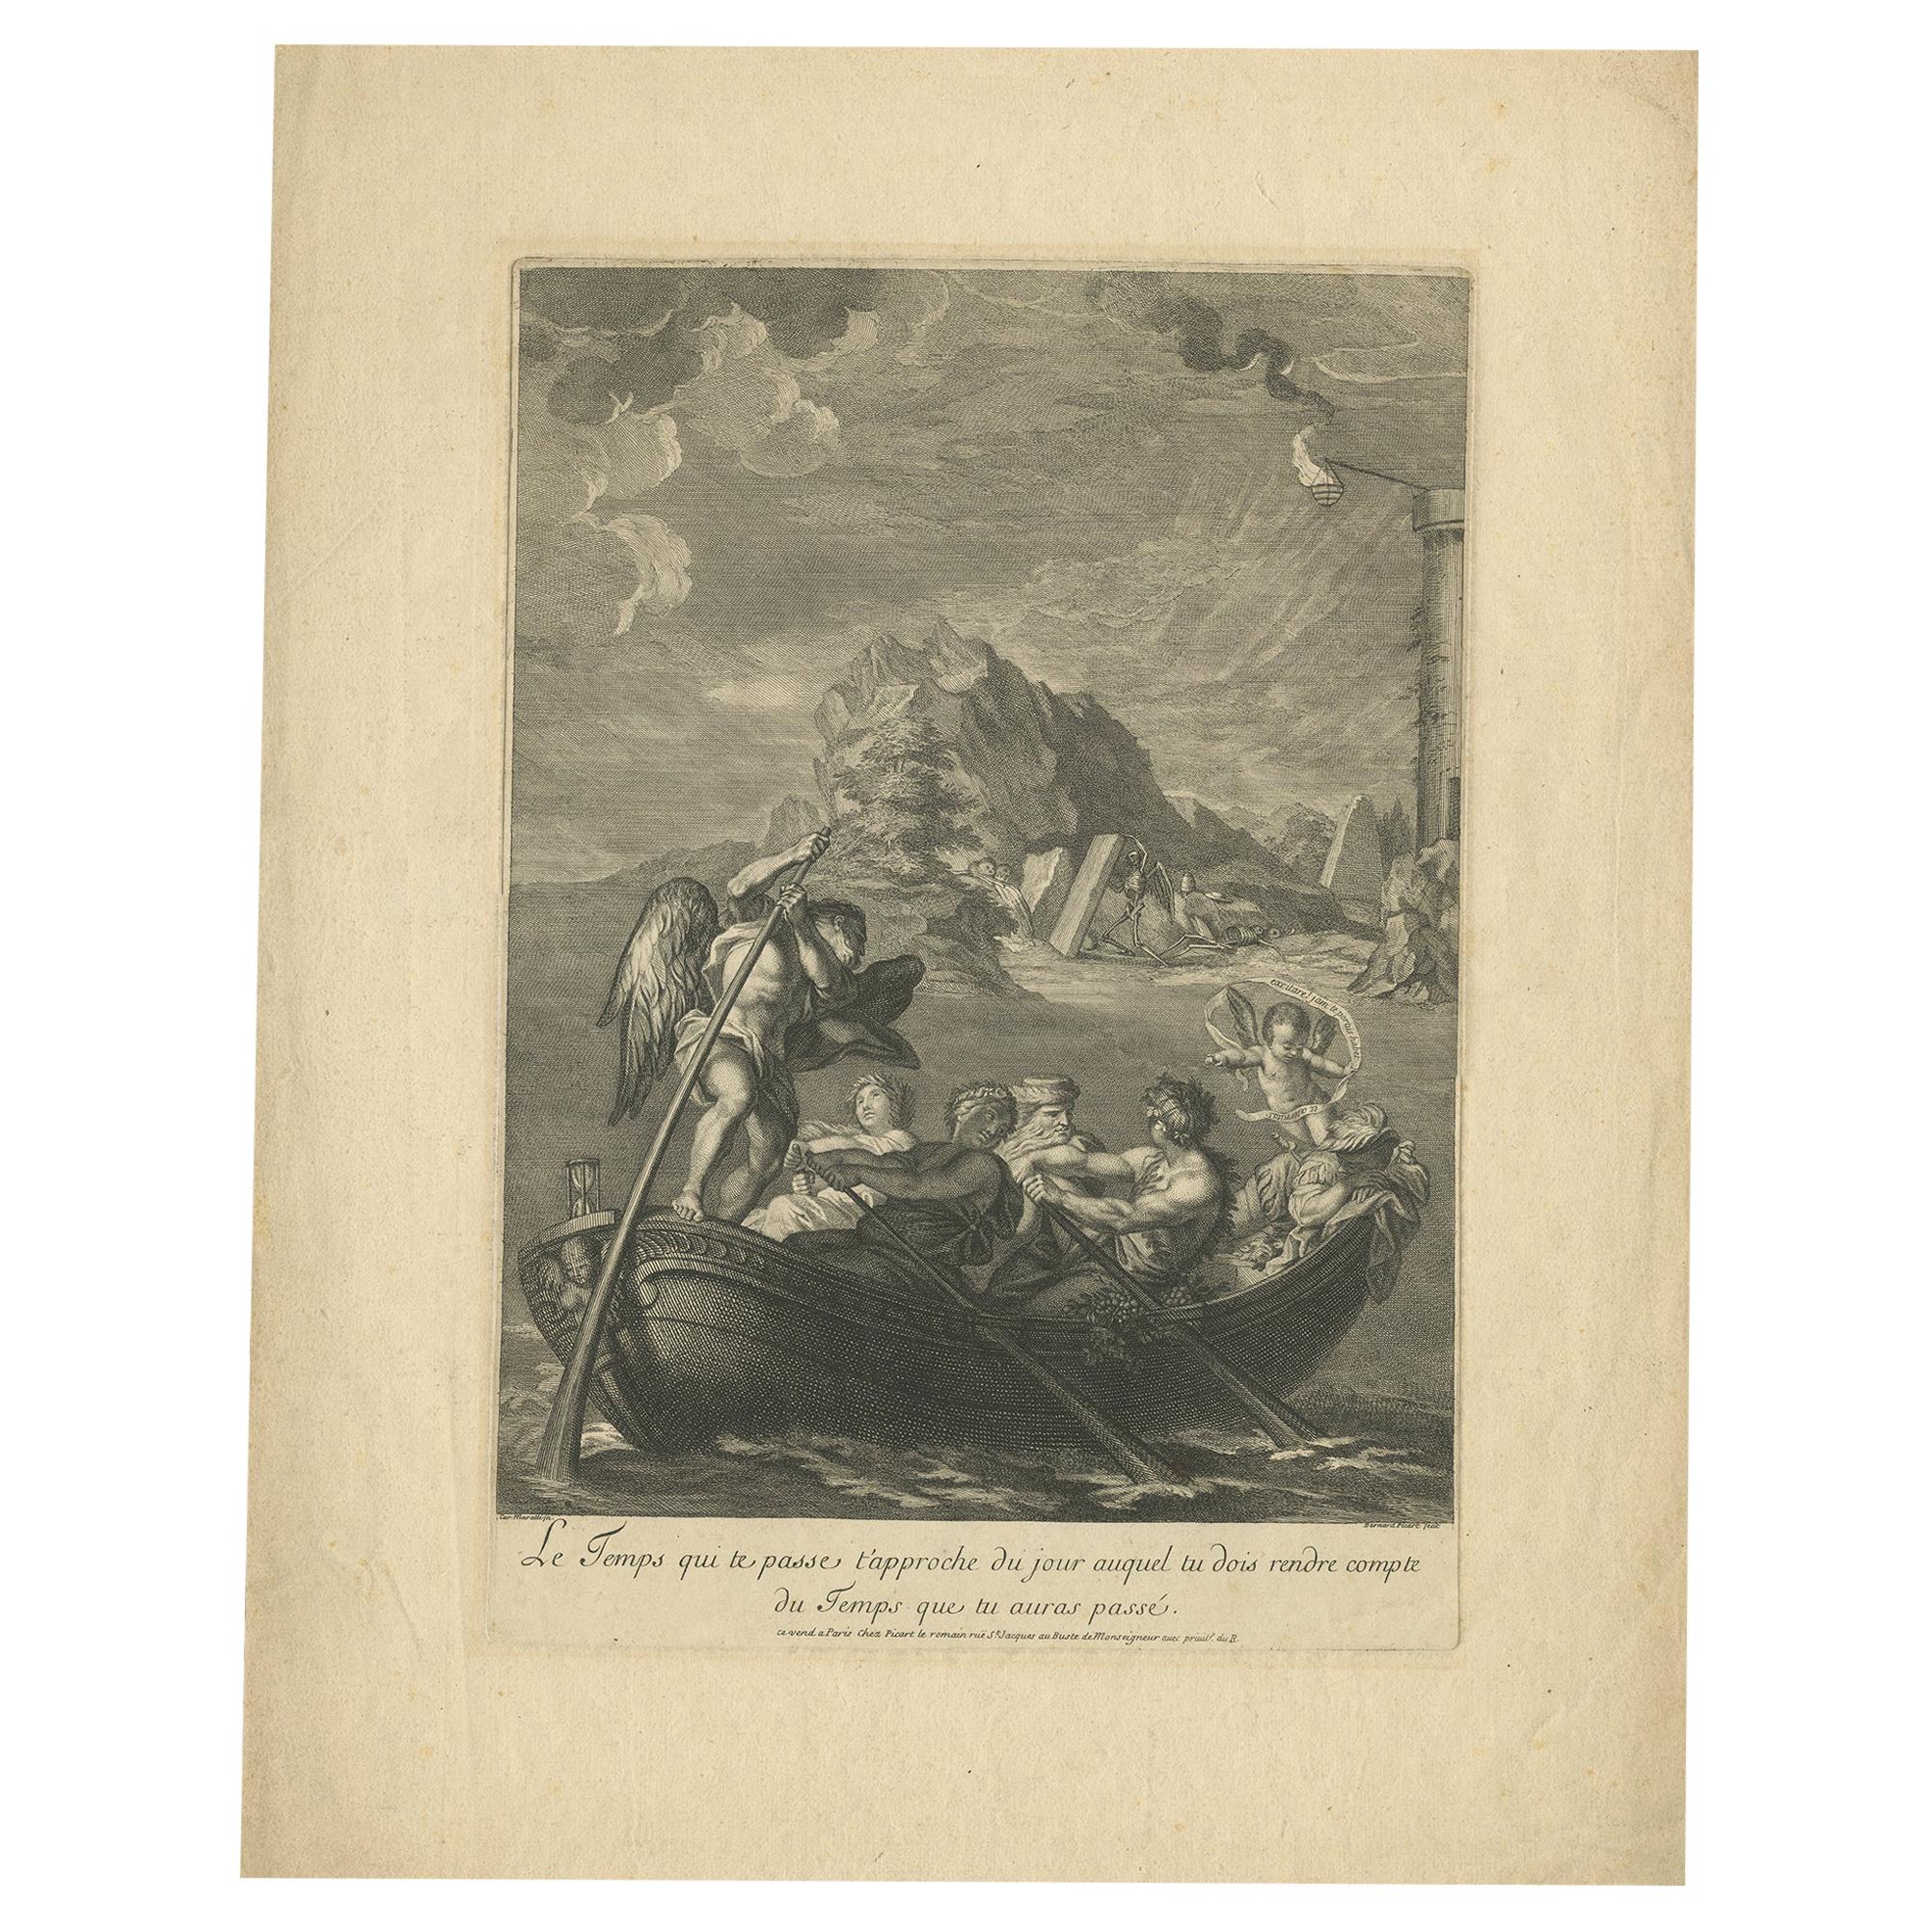 Antique Print of the Allegory of Time by Picart, circa 1720